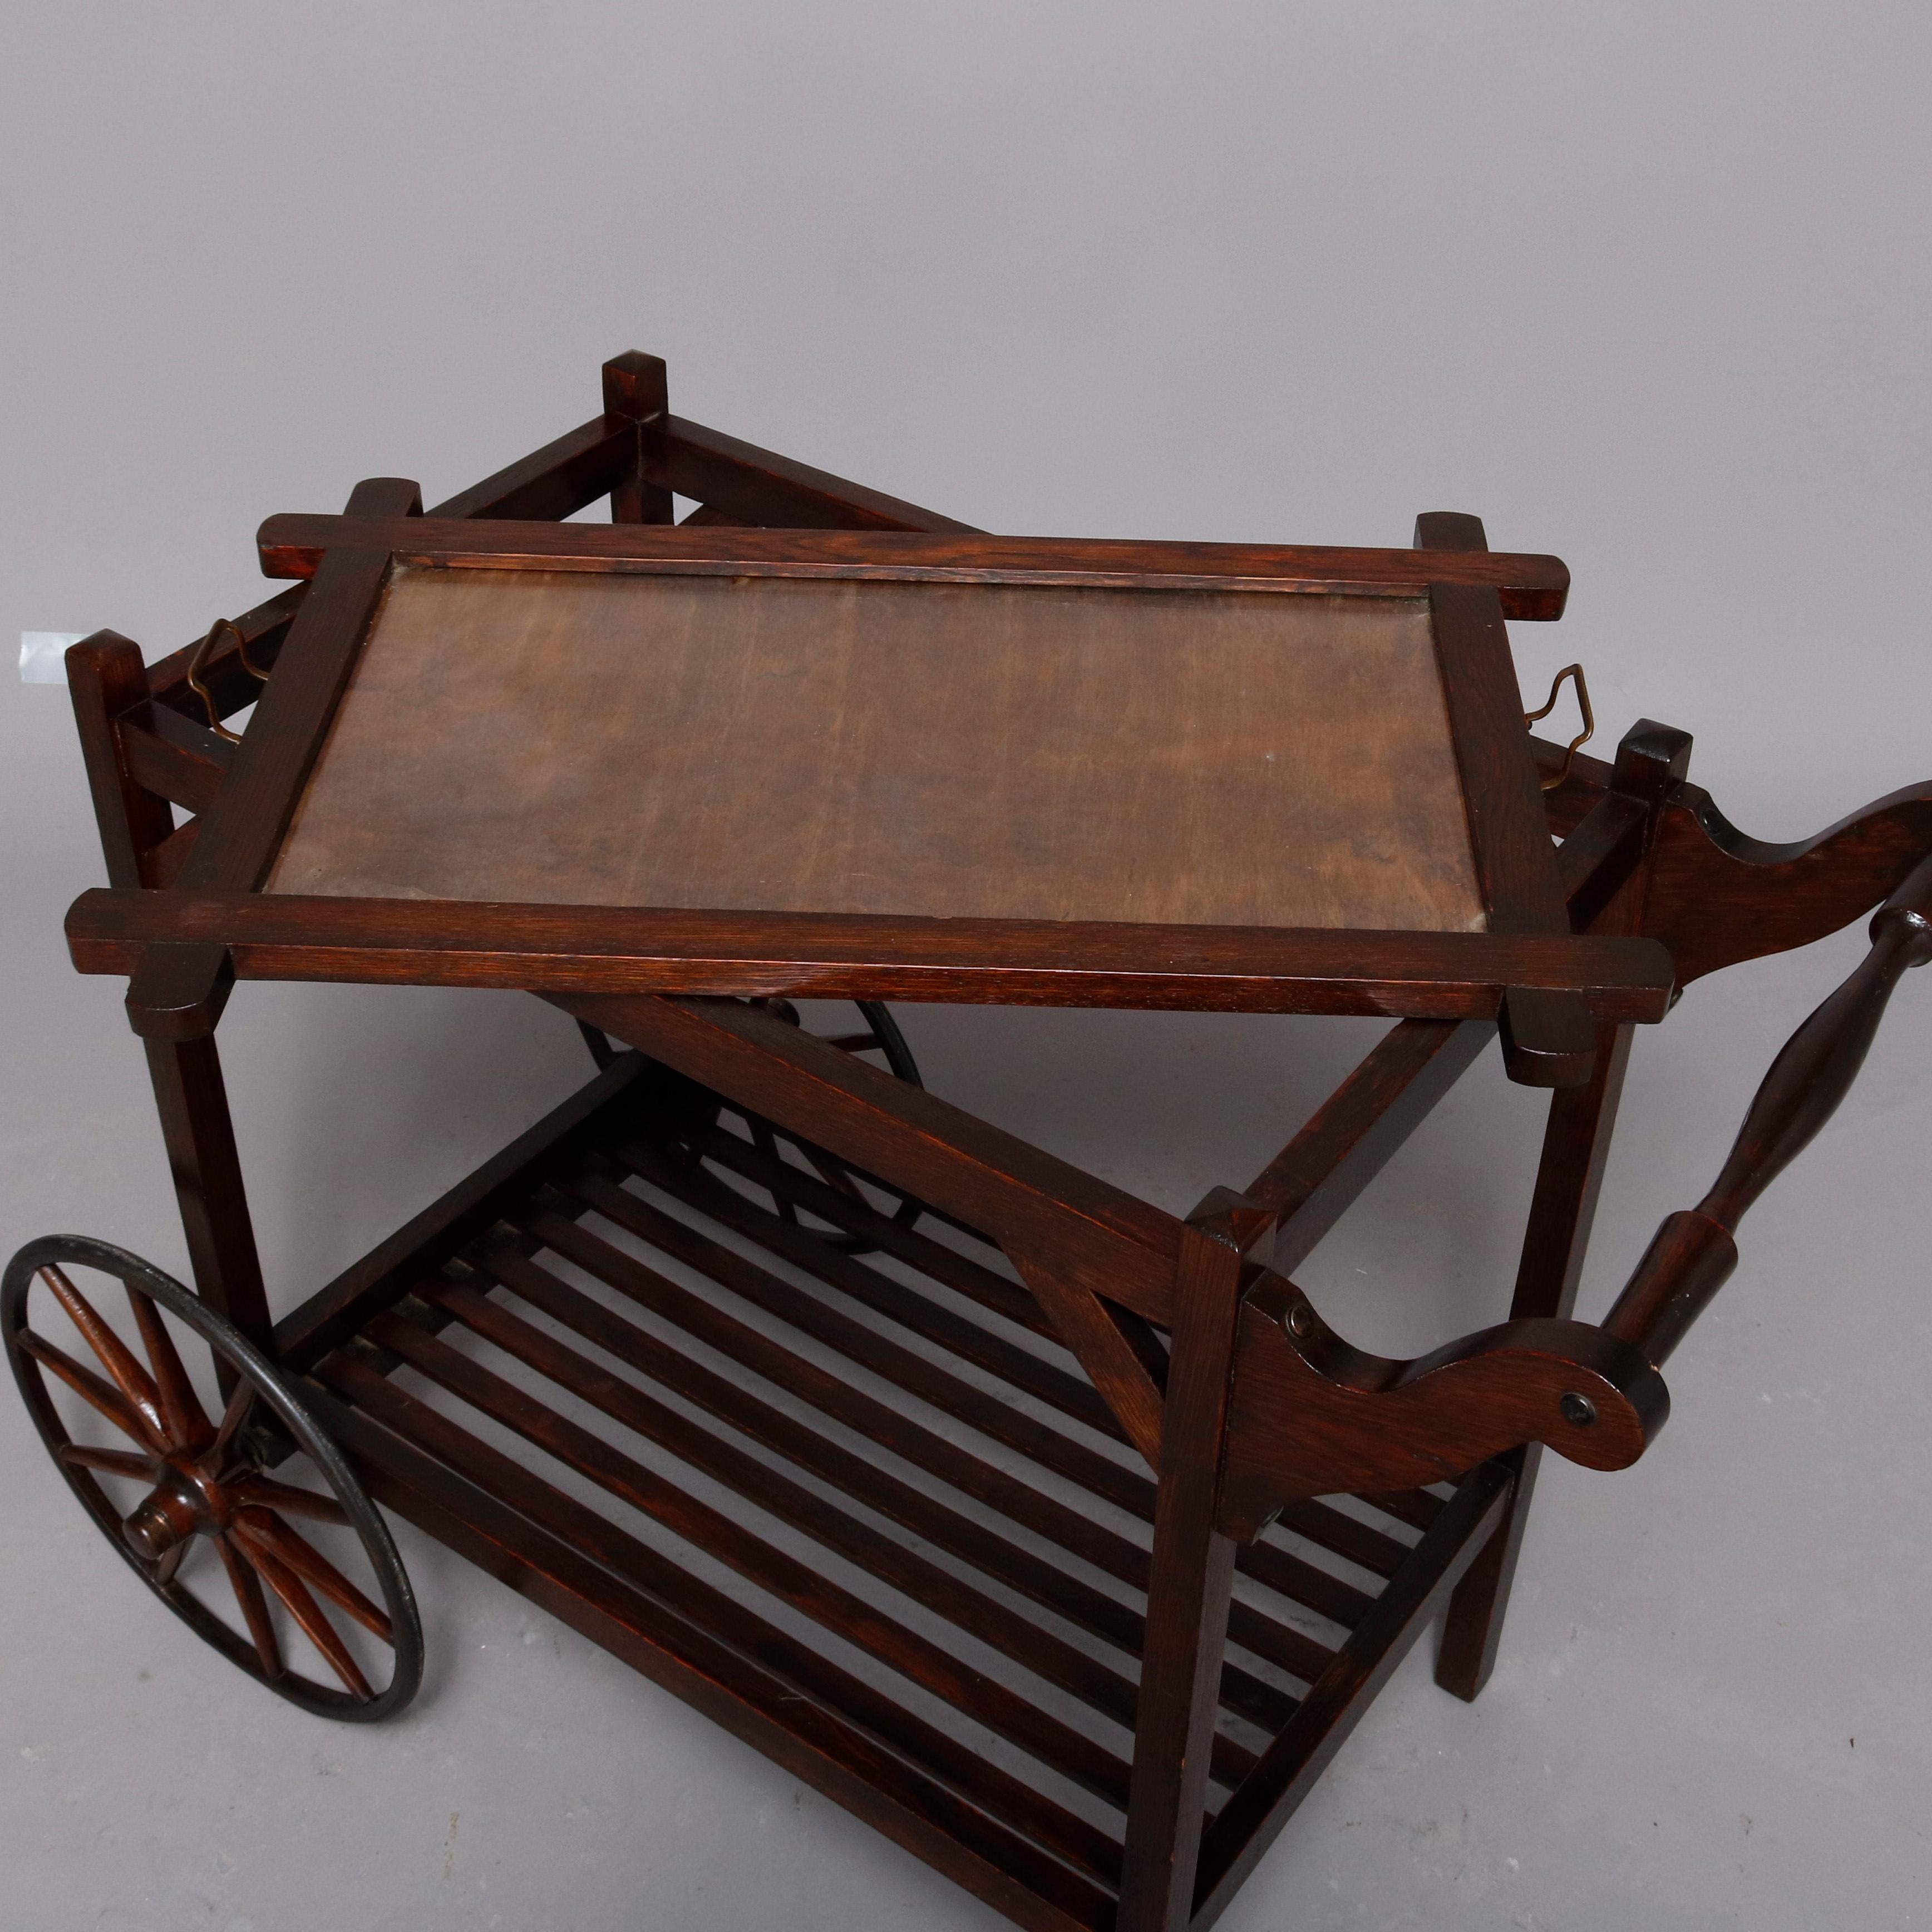 An Arts & Crafts Mission oak stickley brothers school tea cart offers upper removable serving tray, shaped handle, lower slat shelf and oversized wheels, circa 1910.

Measures - 30